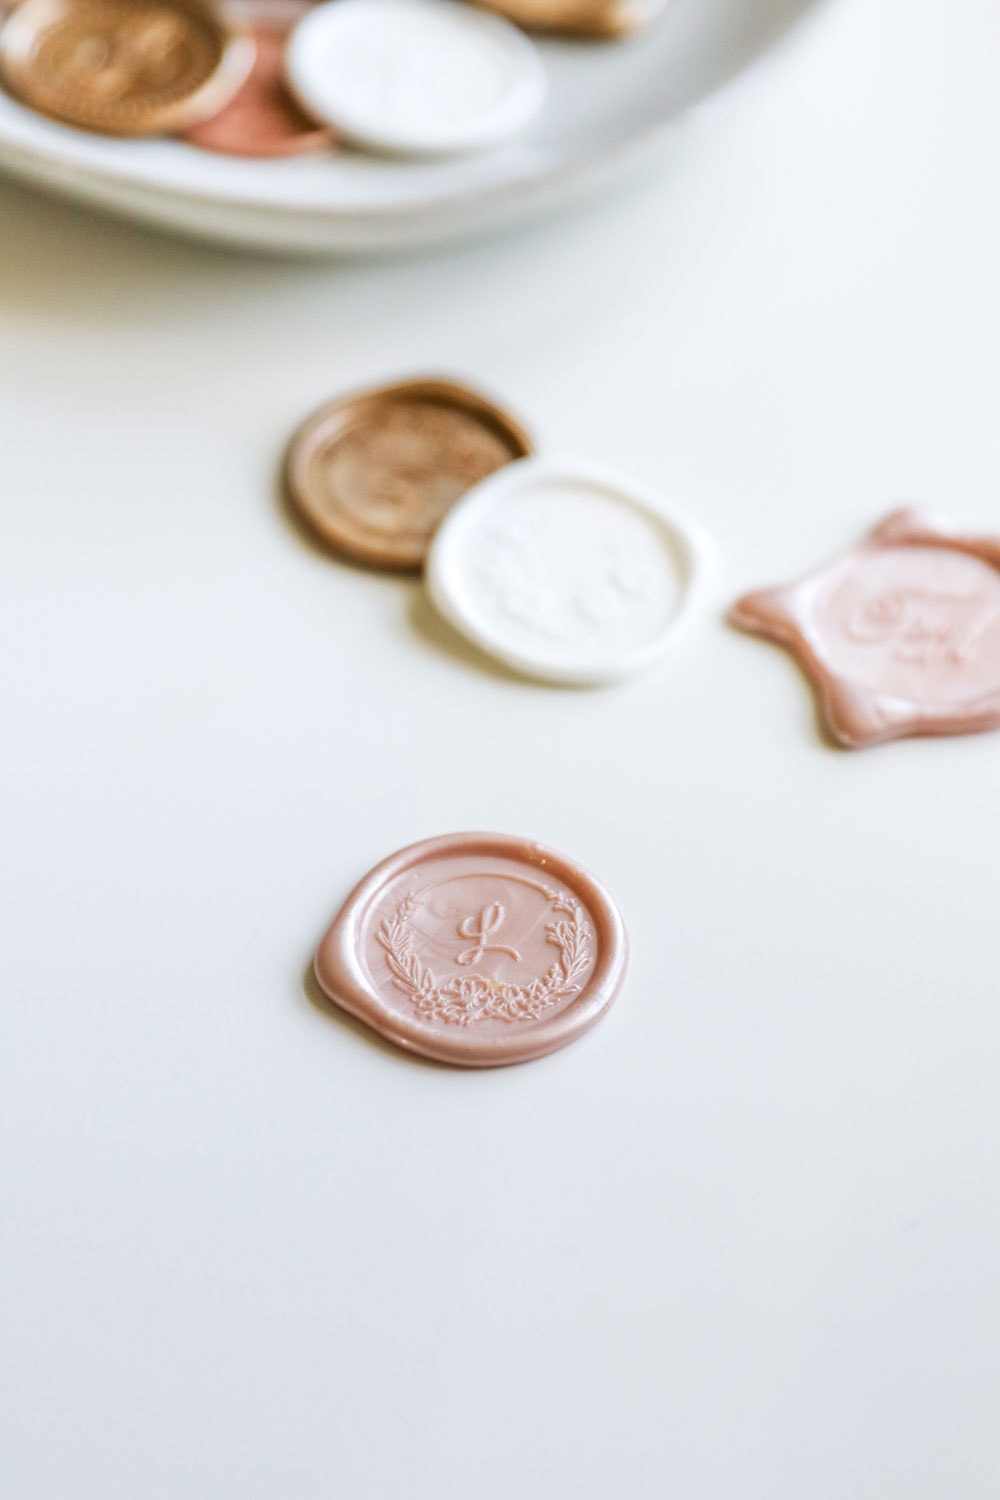 Wax seals, can you use candles for wax seals, how to make wax seals, can wax seals be mailed